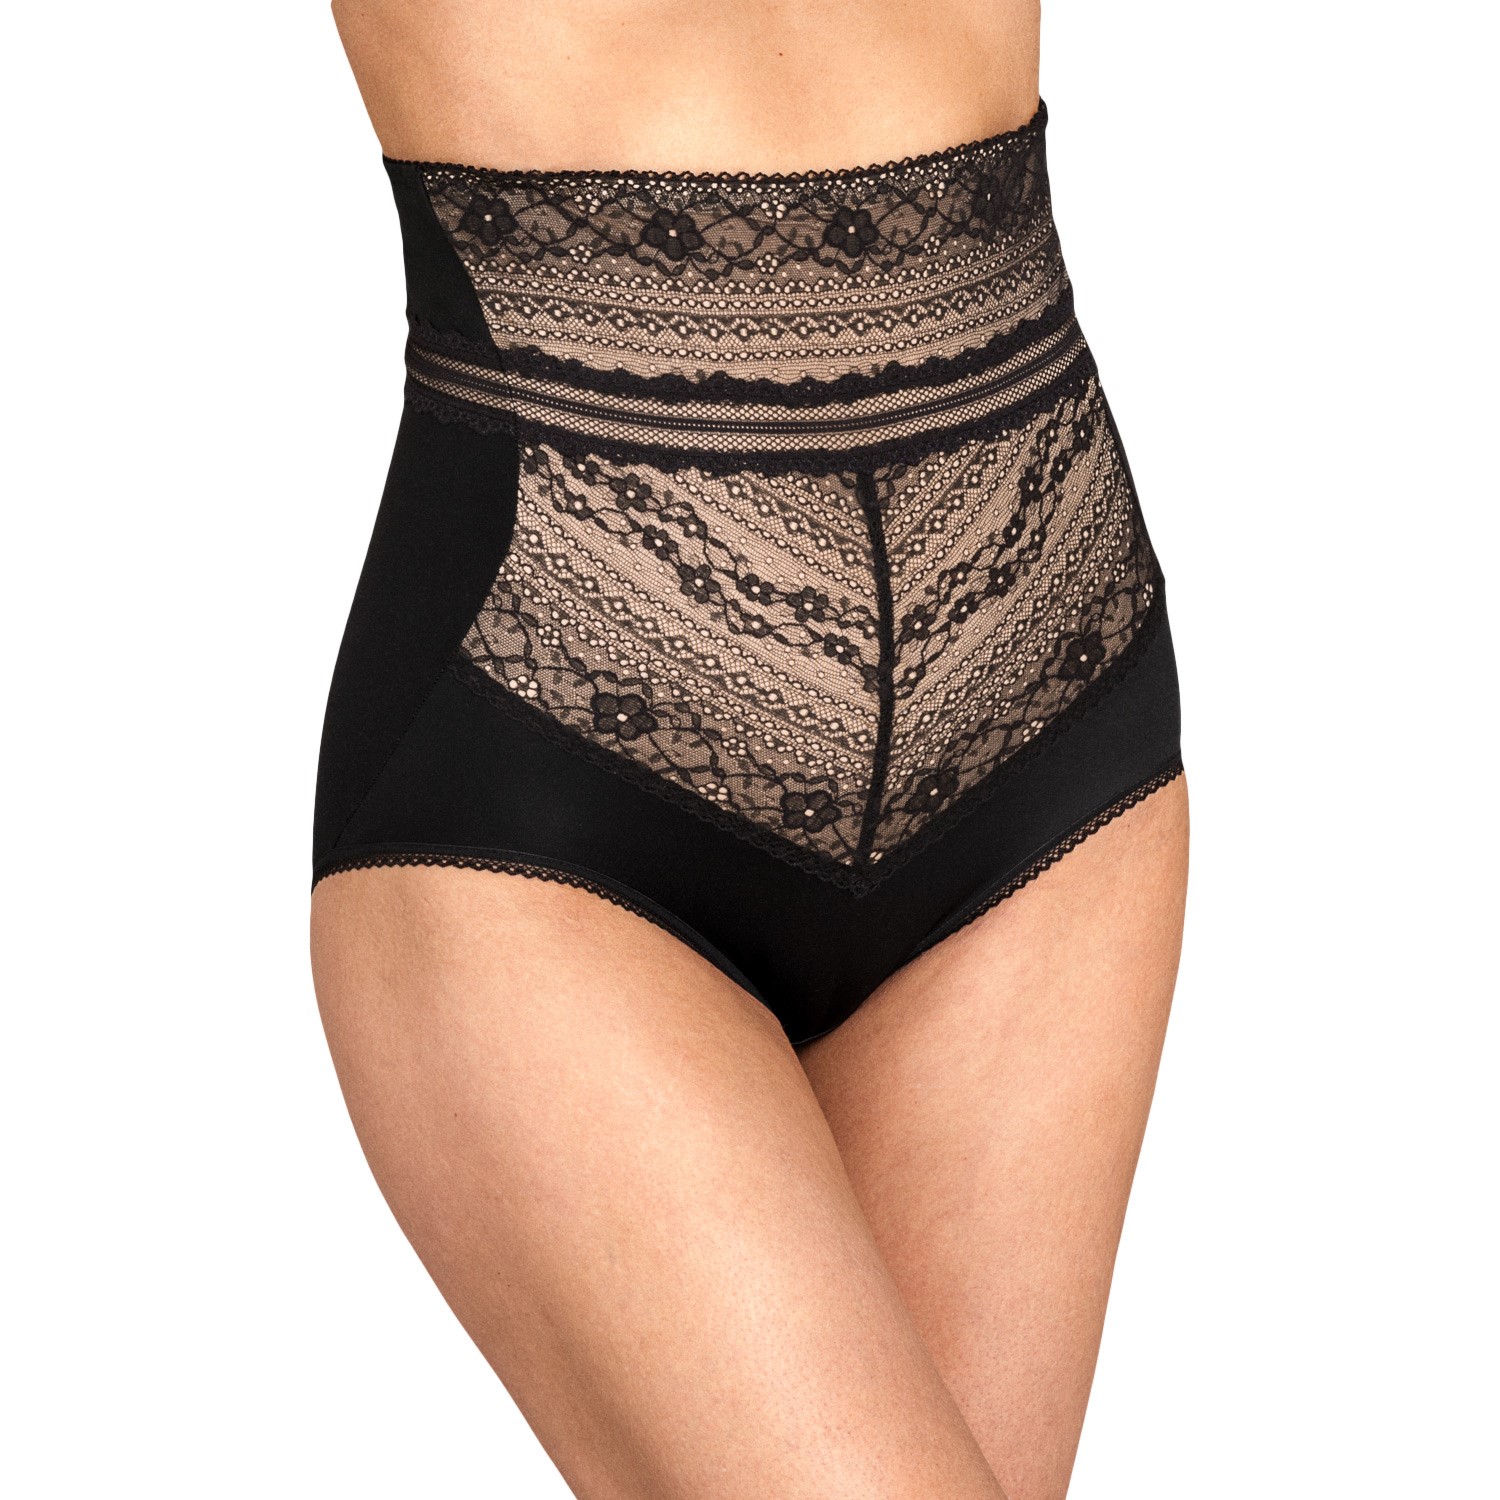 Miss Mary Lace Vision High Waist Panty Girdle